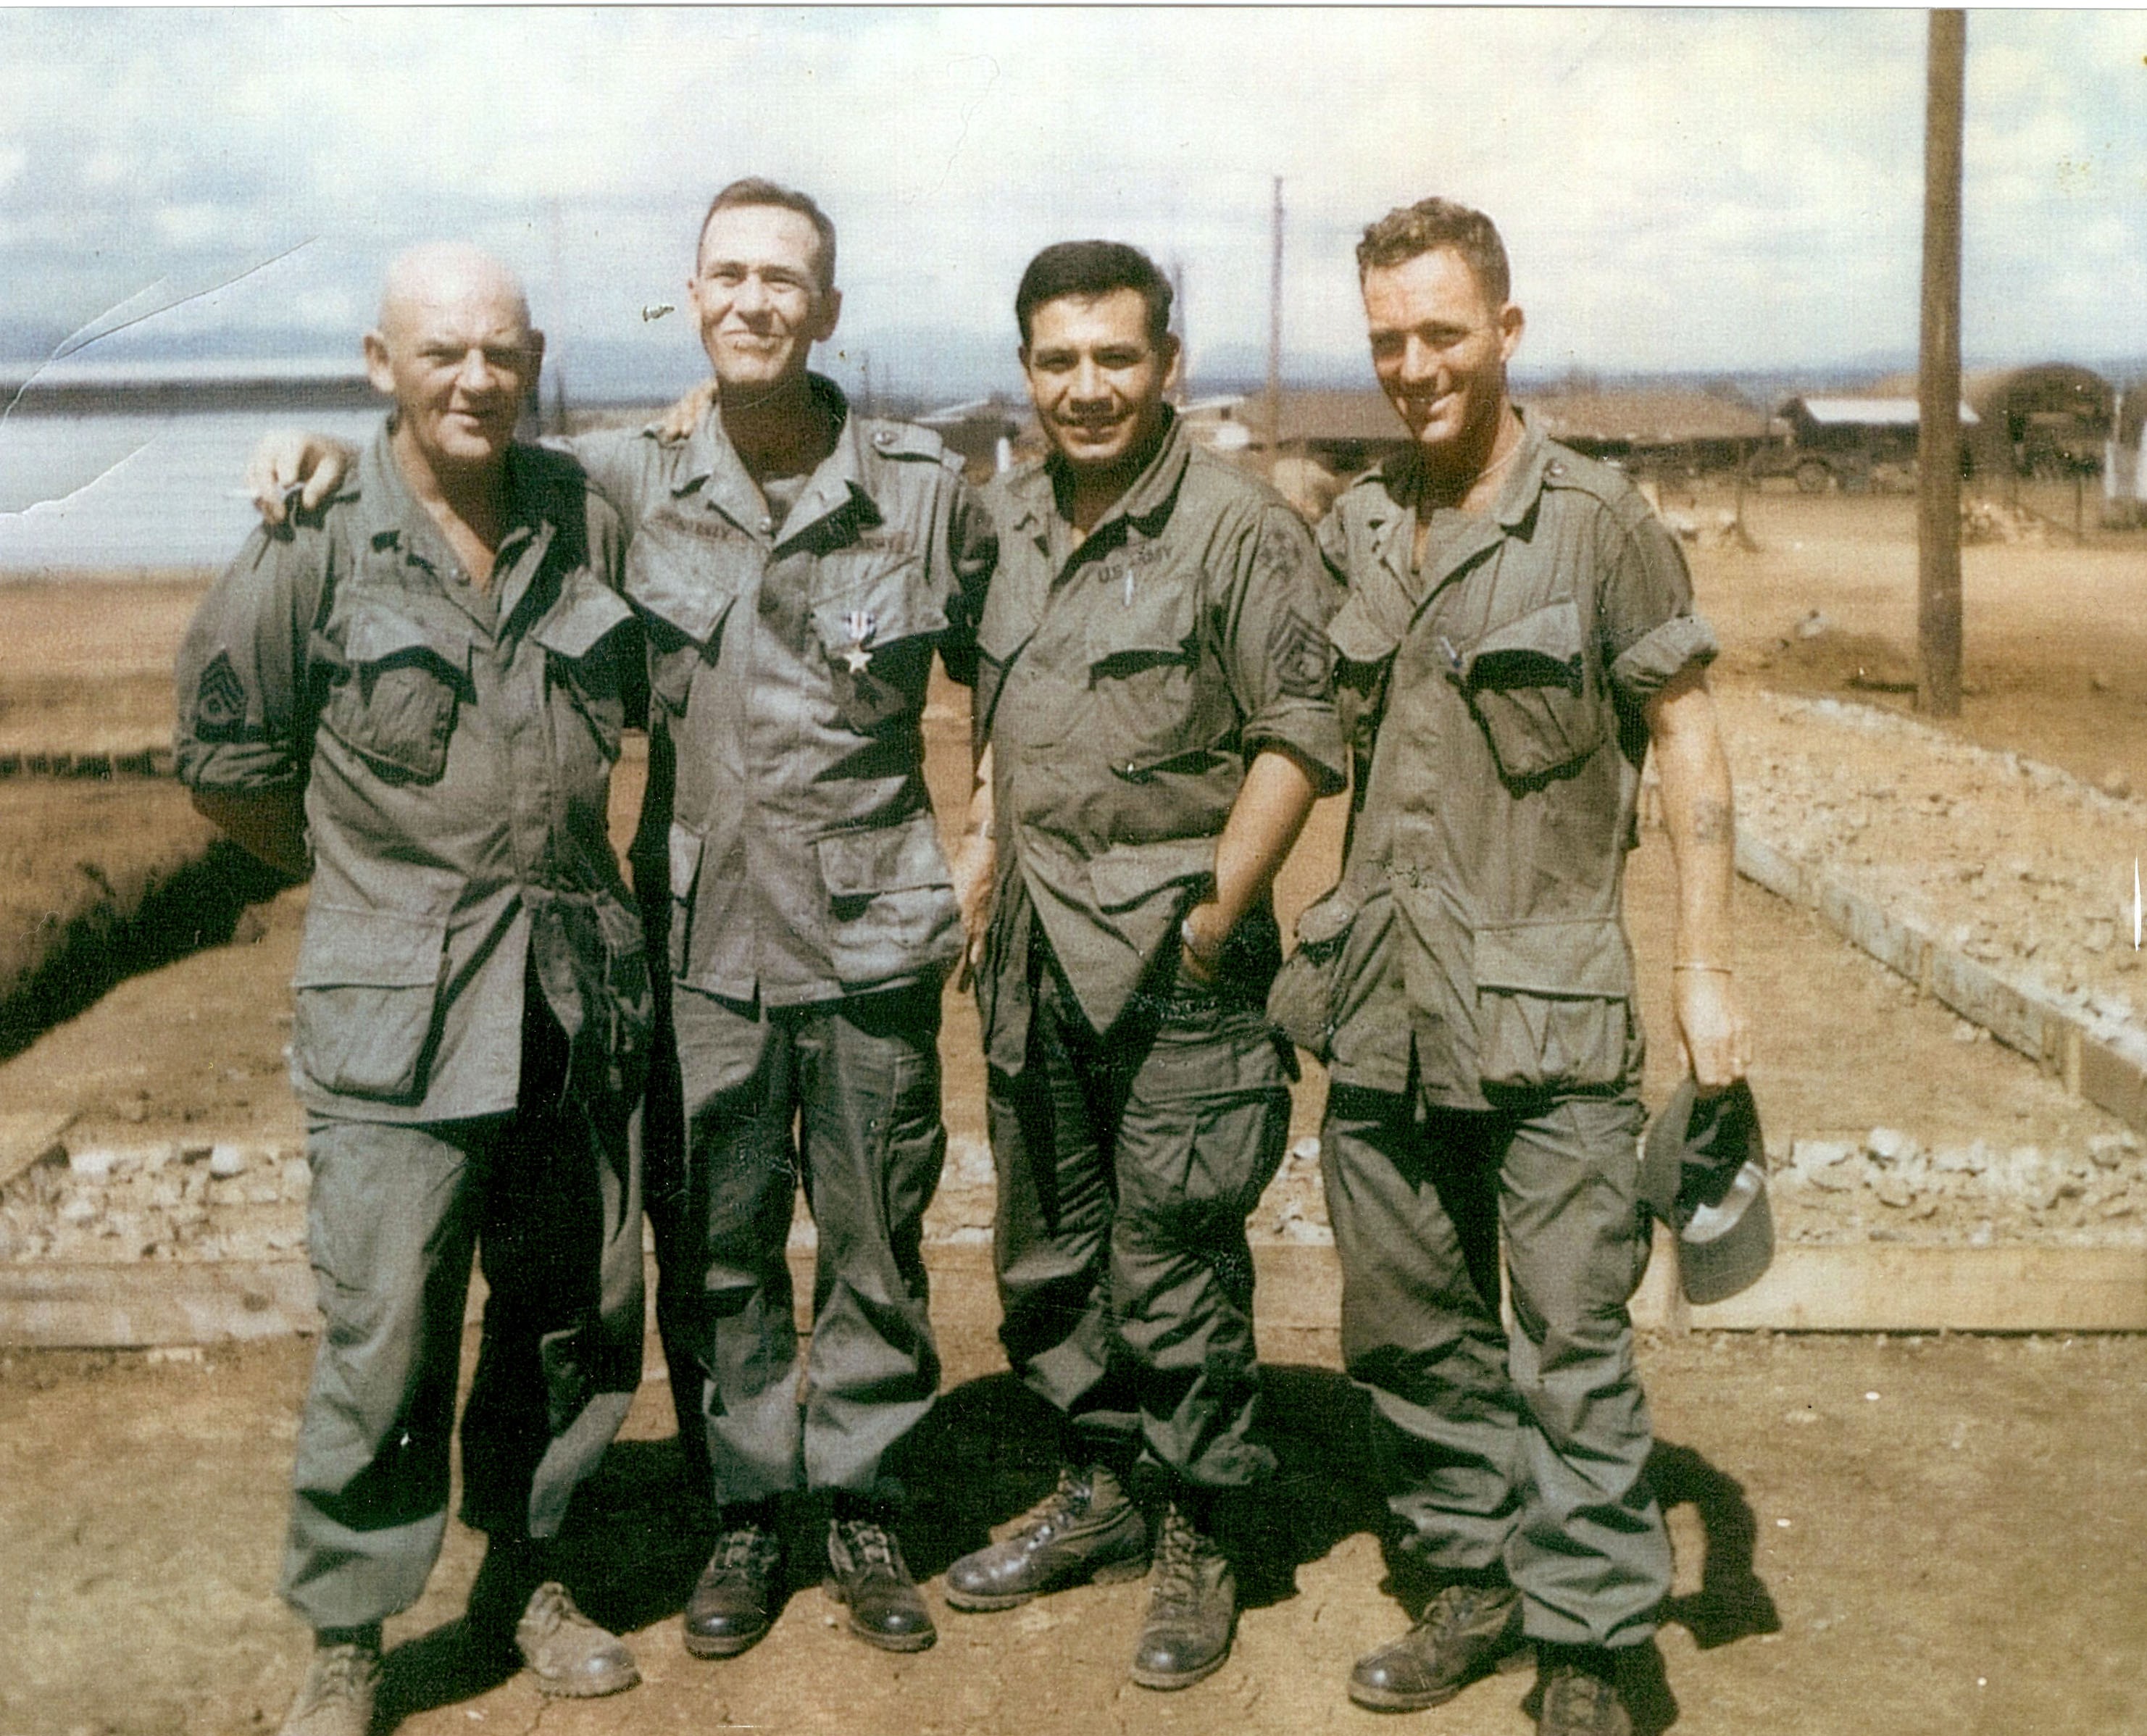 An old photo of a group of soldiers wearing the M-65 field jacket.